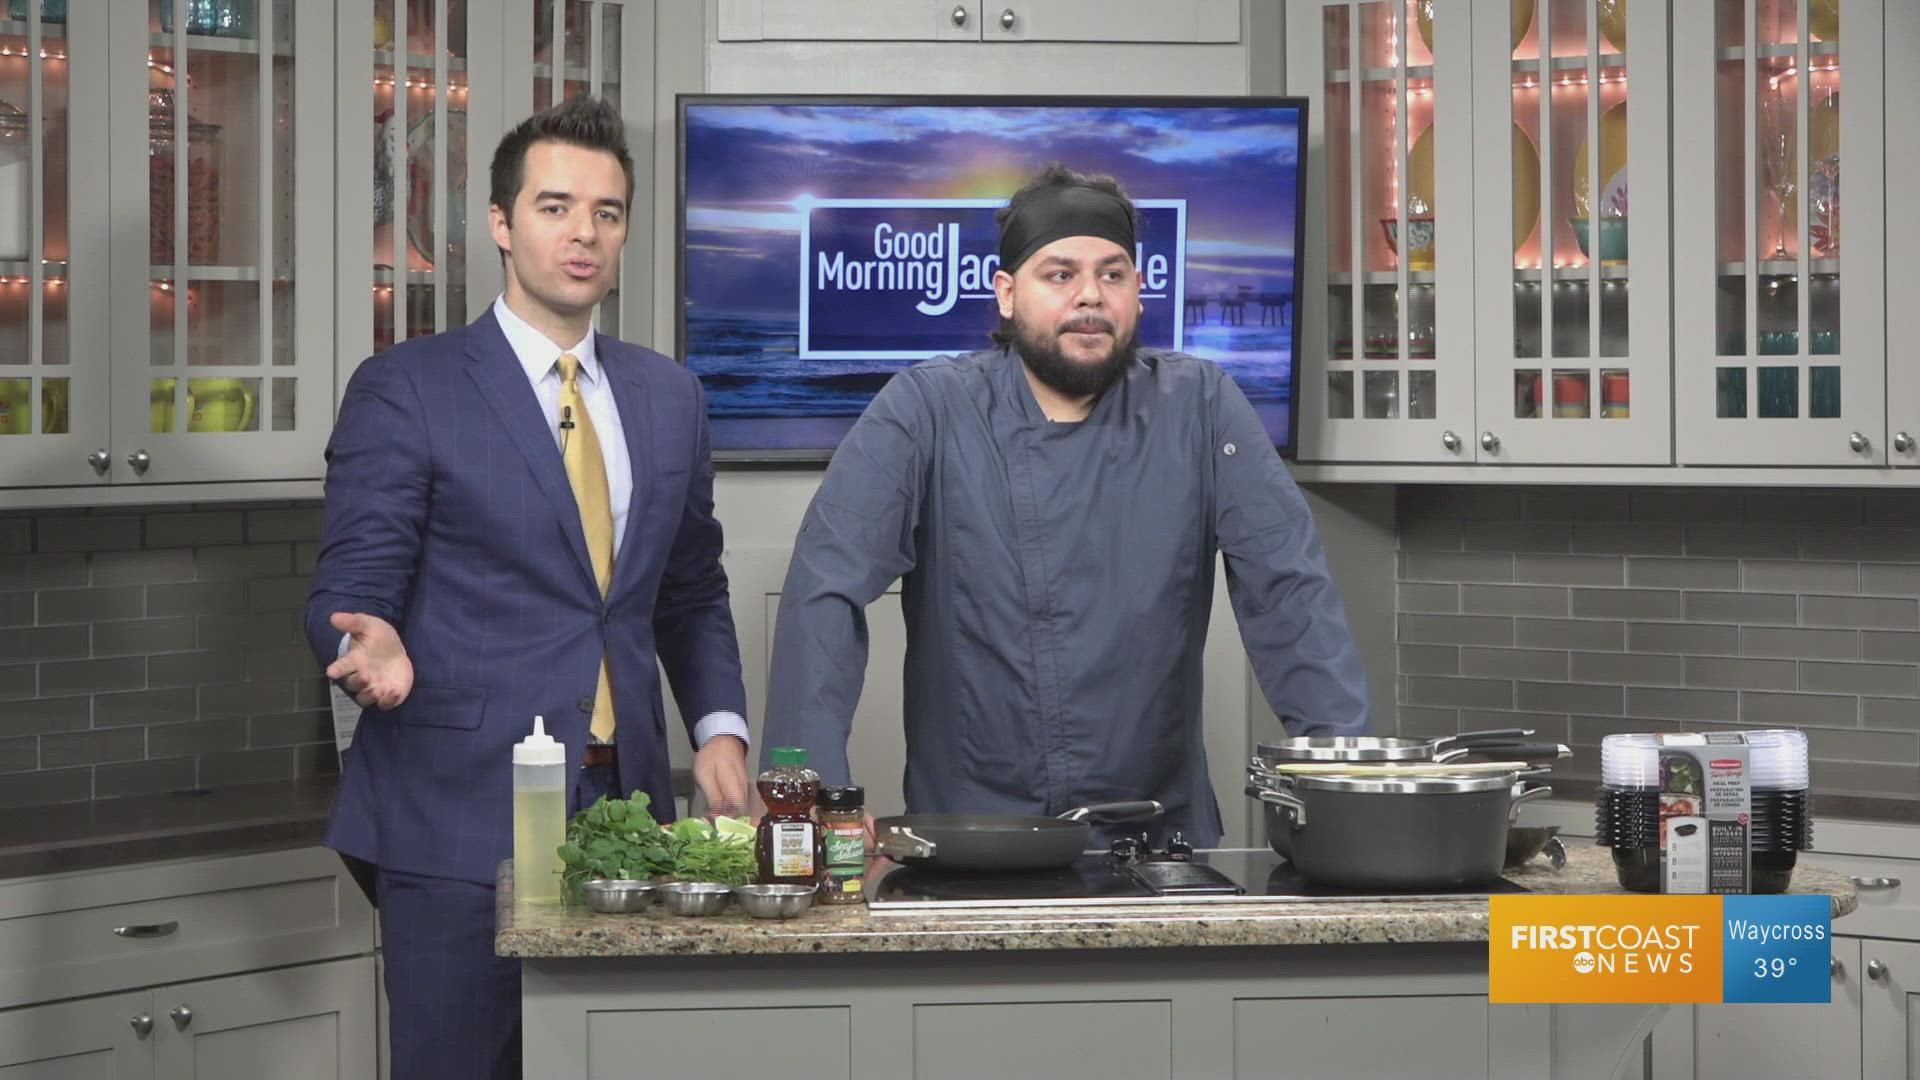 Chef Esteban Azofeifa of El Cubano Jax joined the GMJ crew for a demonstration about healthy eating habits.